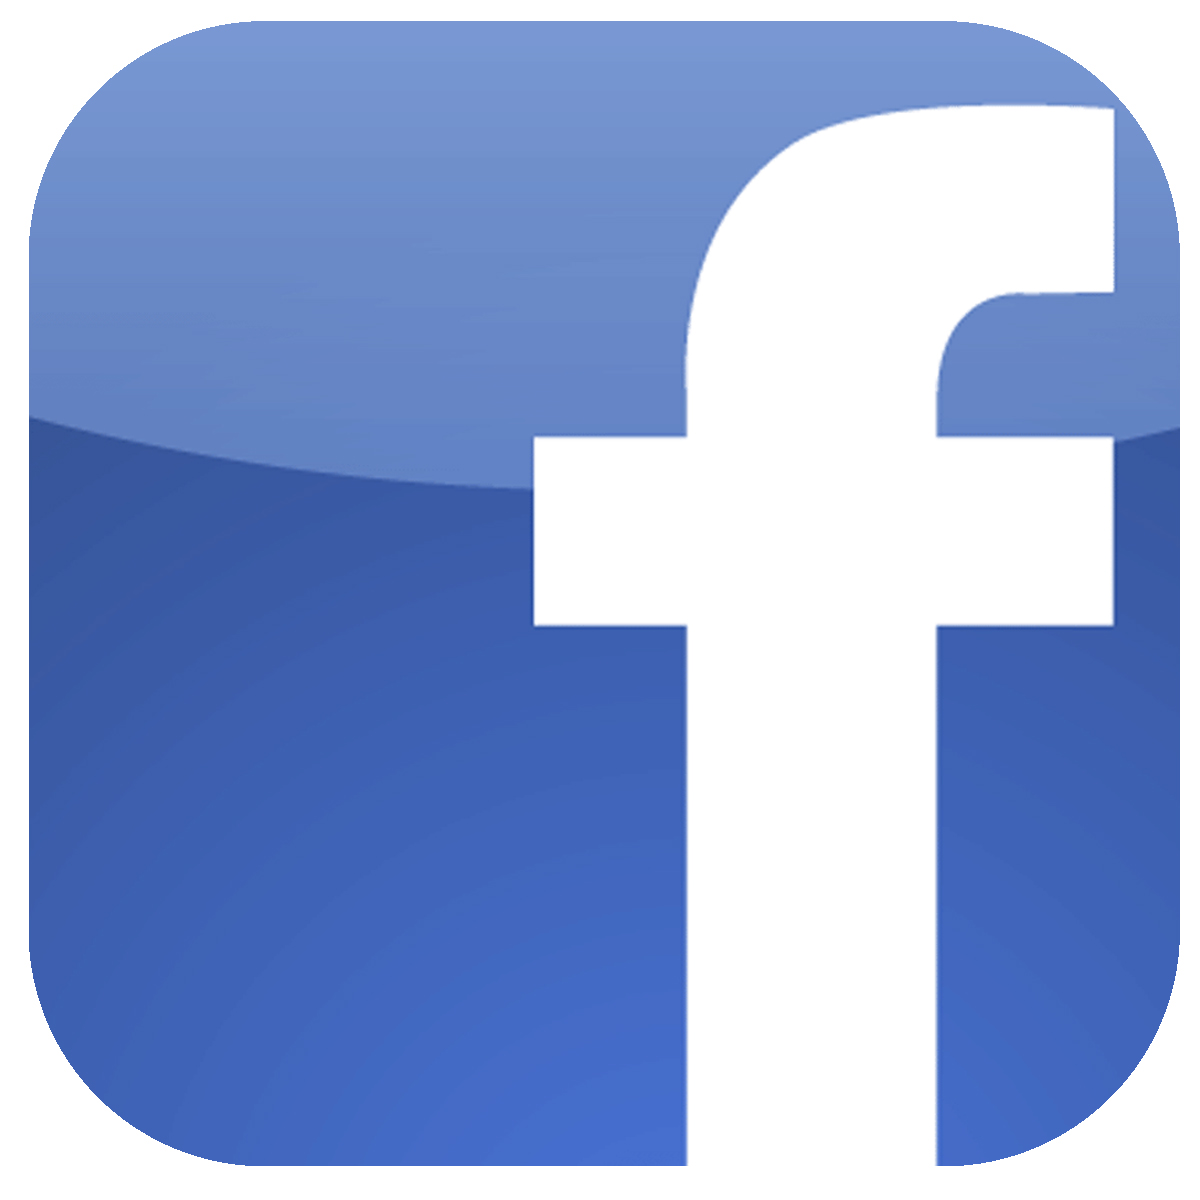 Image of Facebook icon